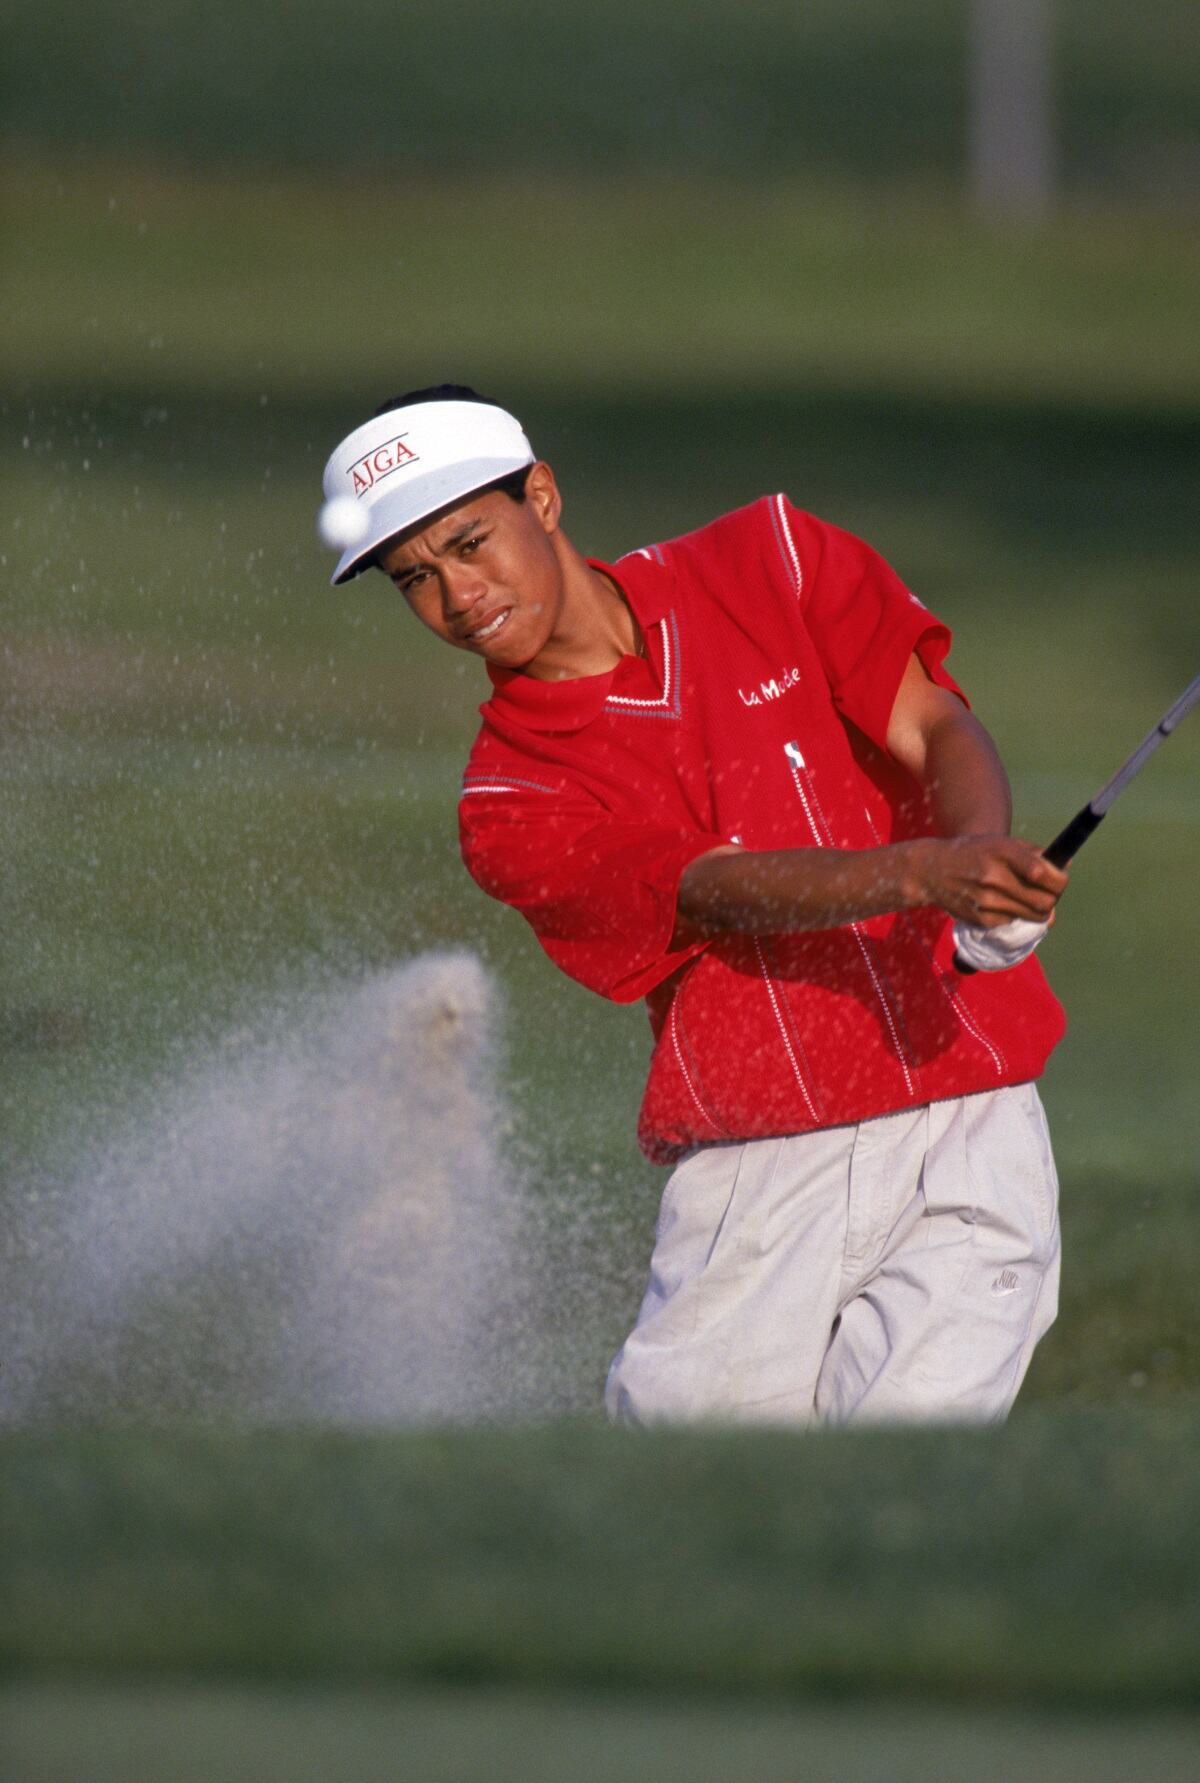 Tiger Woods, wearing a red shirt, golfs during a 1992 tournament. He was just 16 years old.